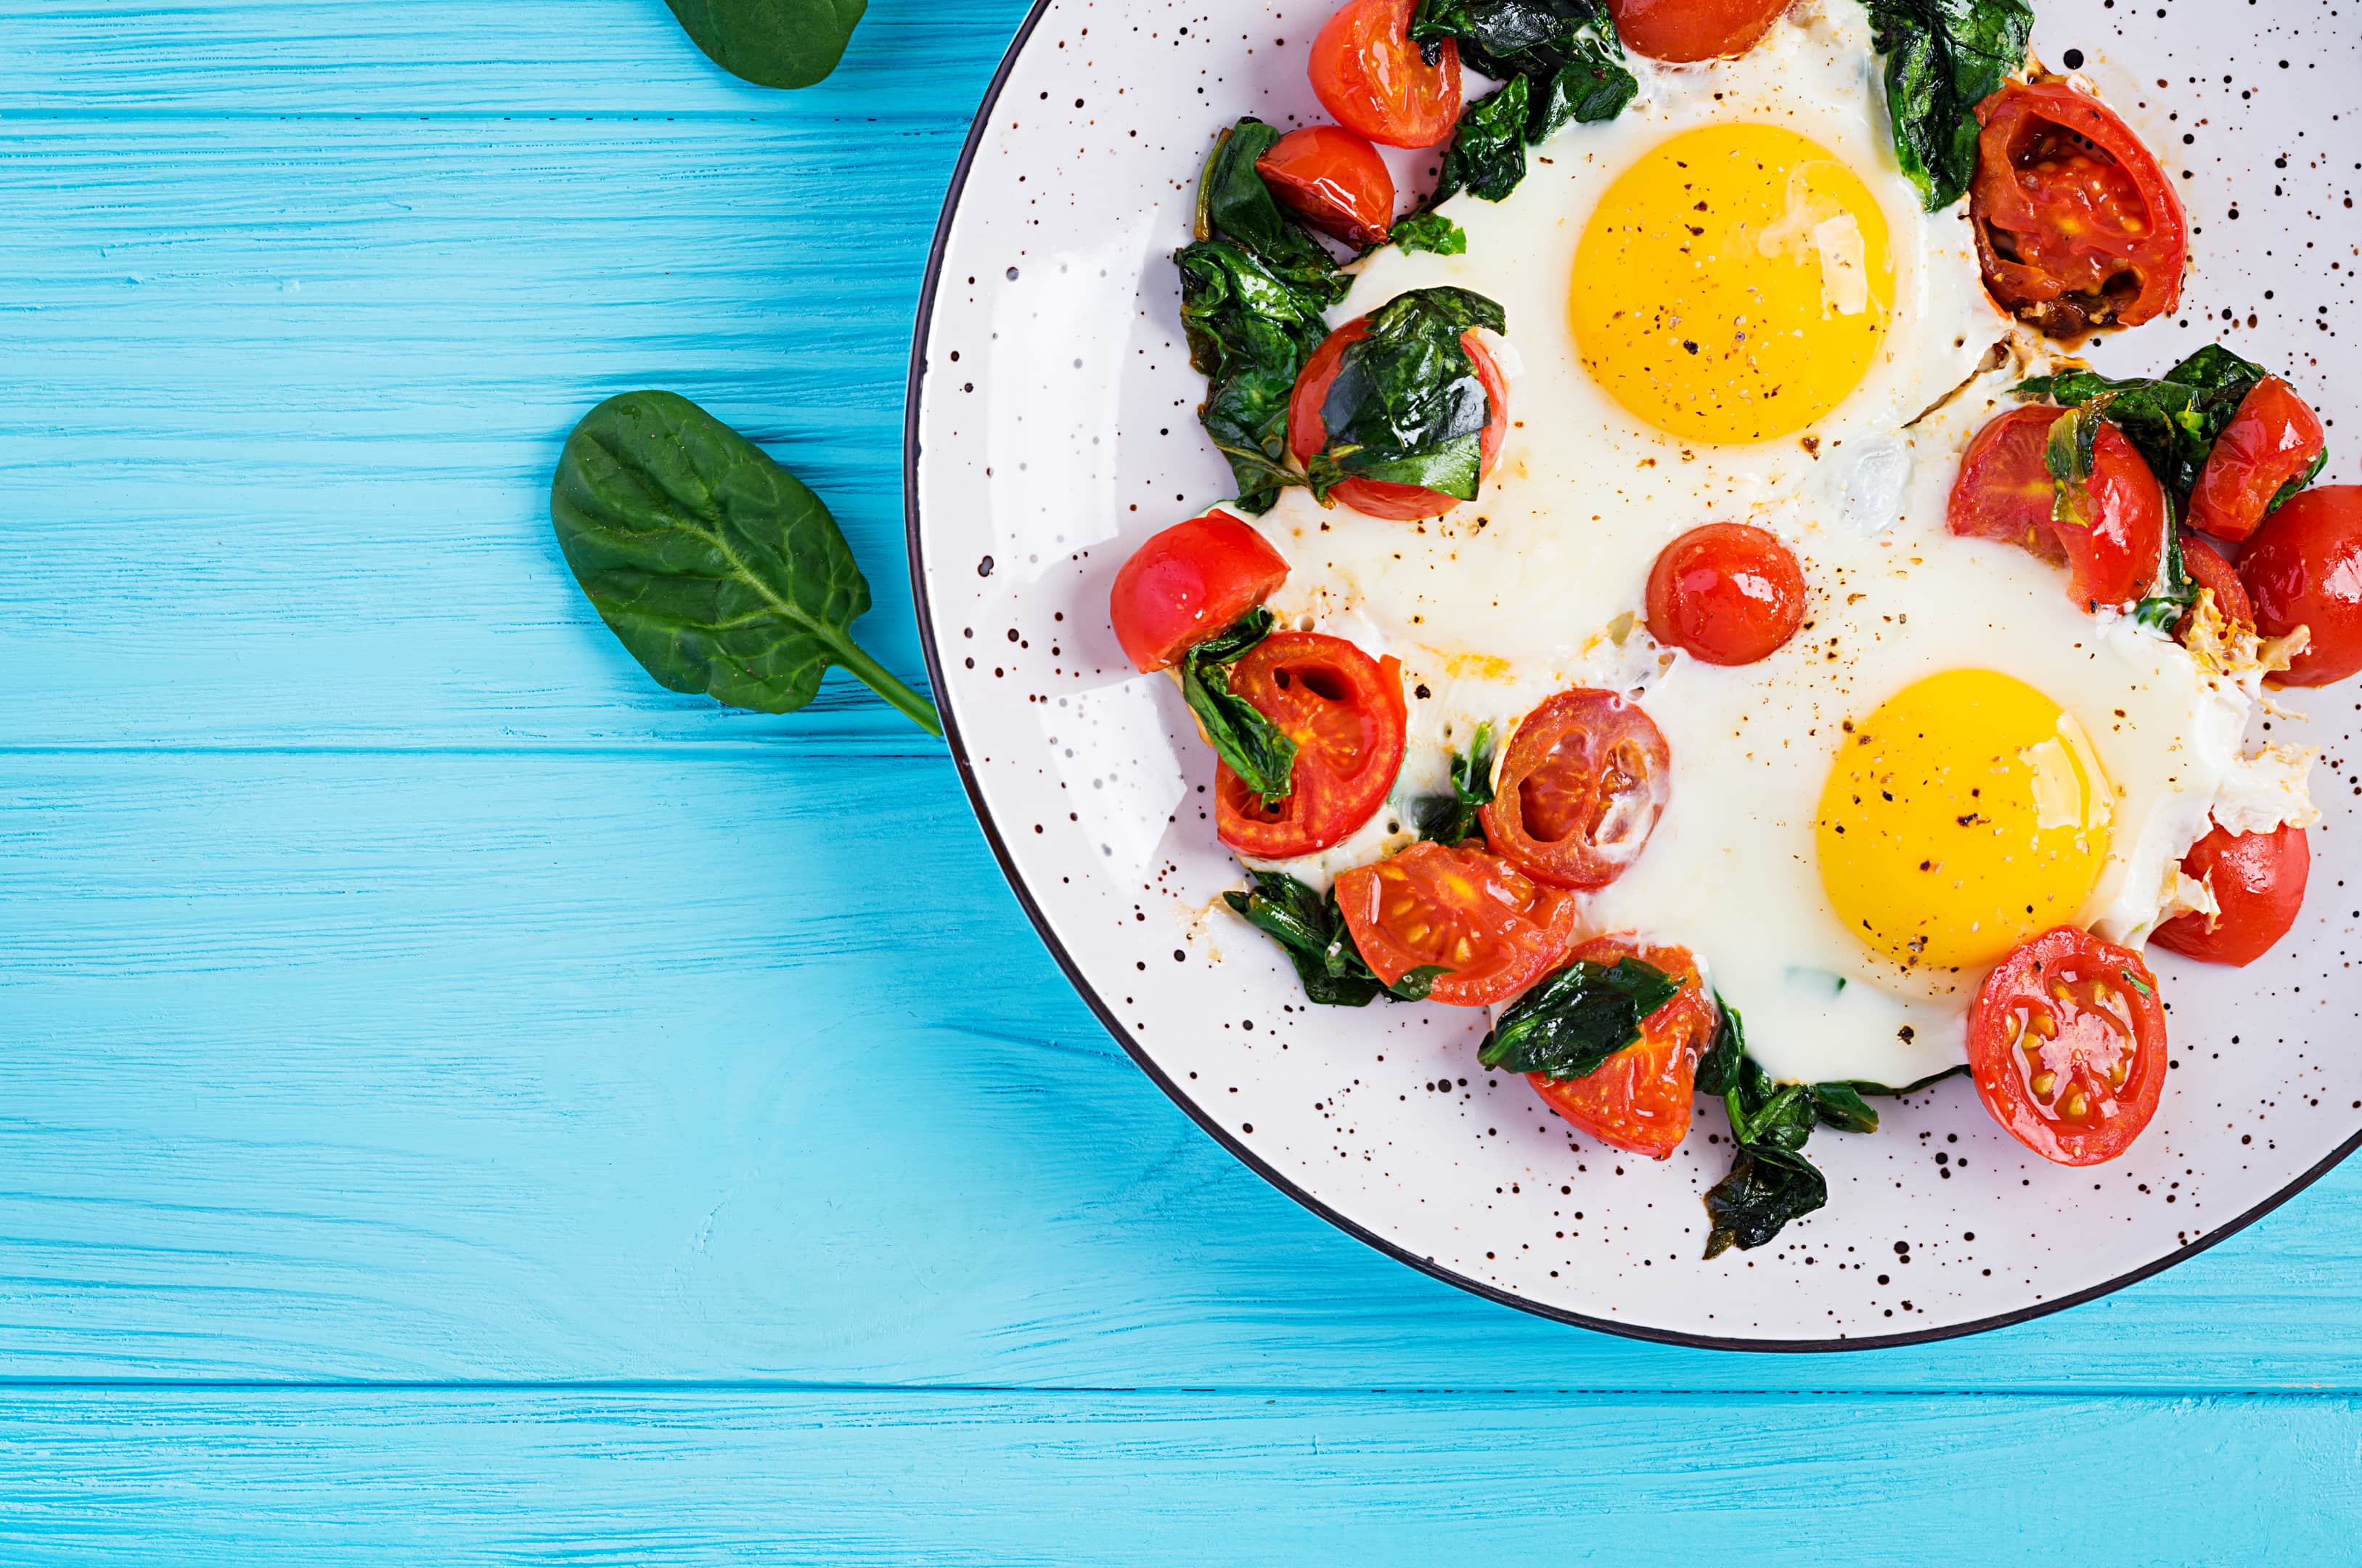 Fried egg, spinach, and tomatoes are on the list of foods that make your thighs bigger